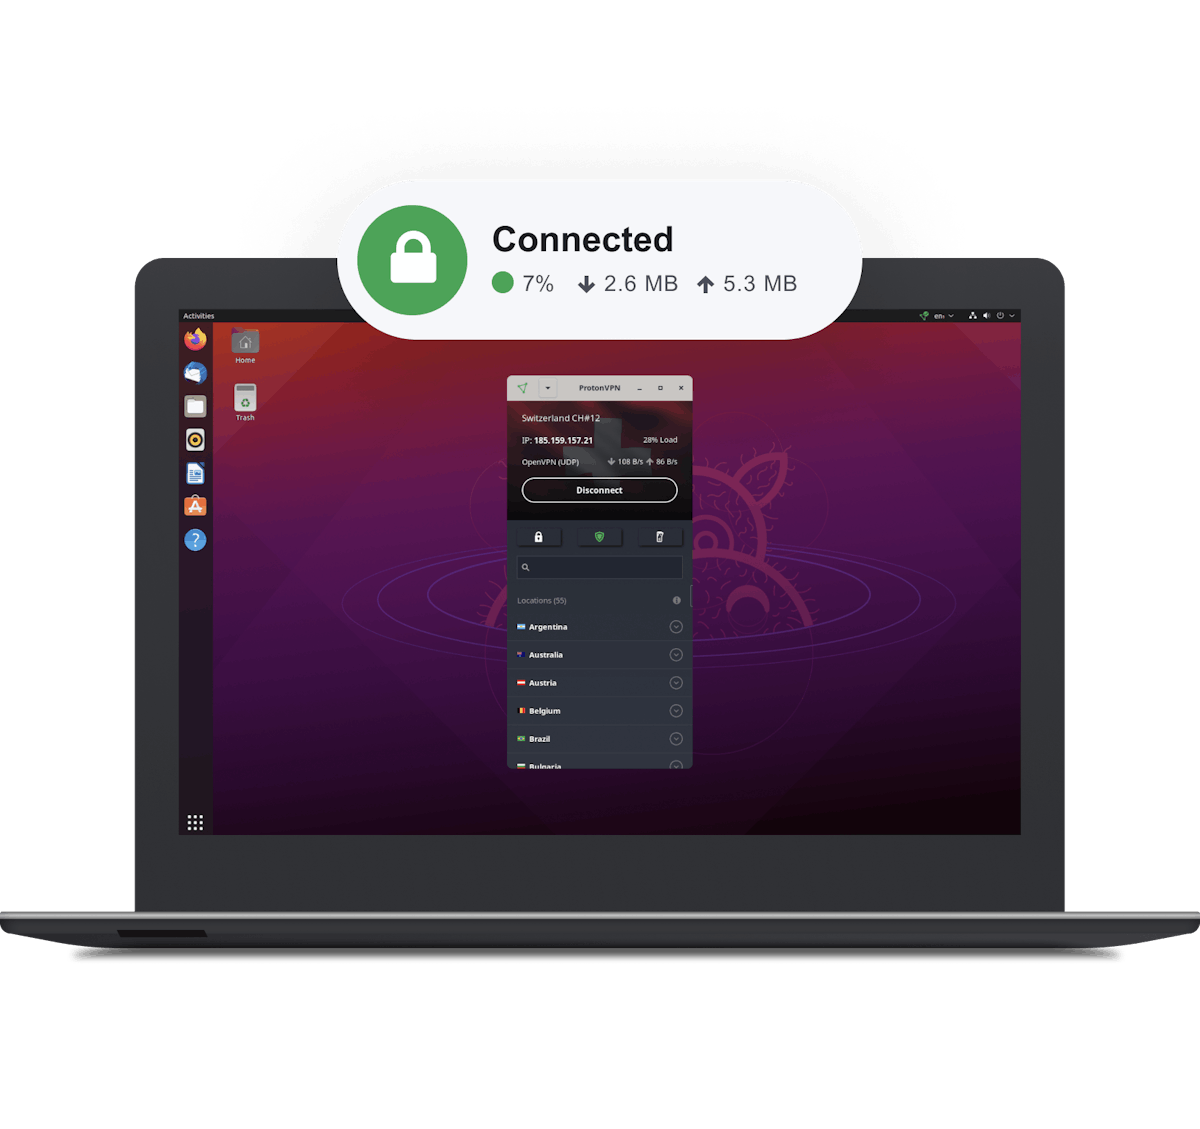 Does Linux have a built in VPN?